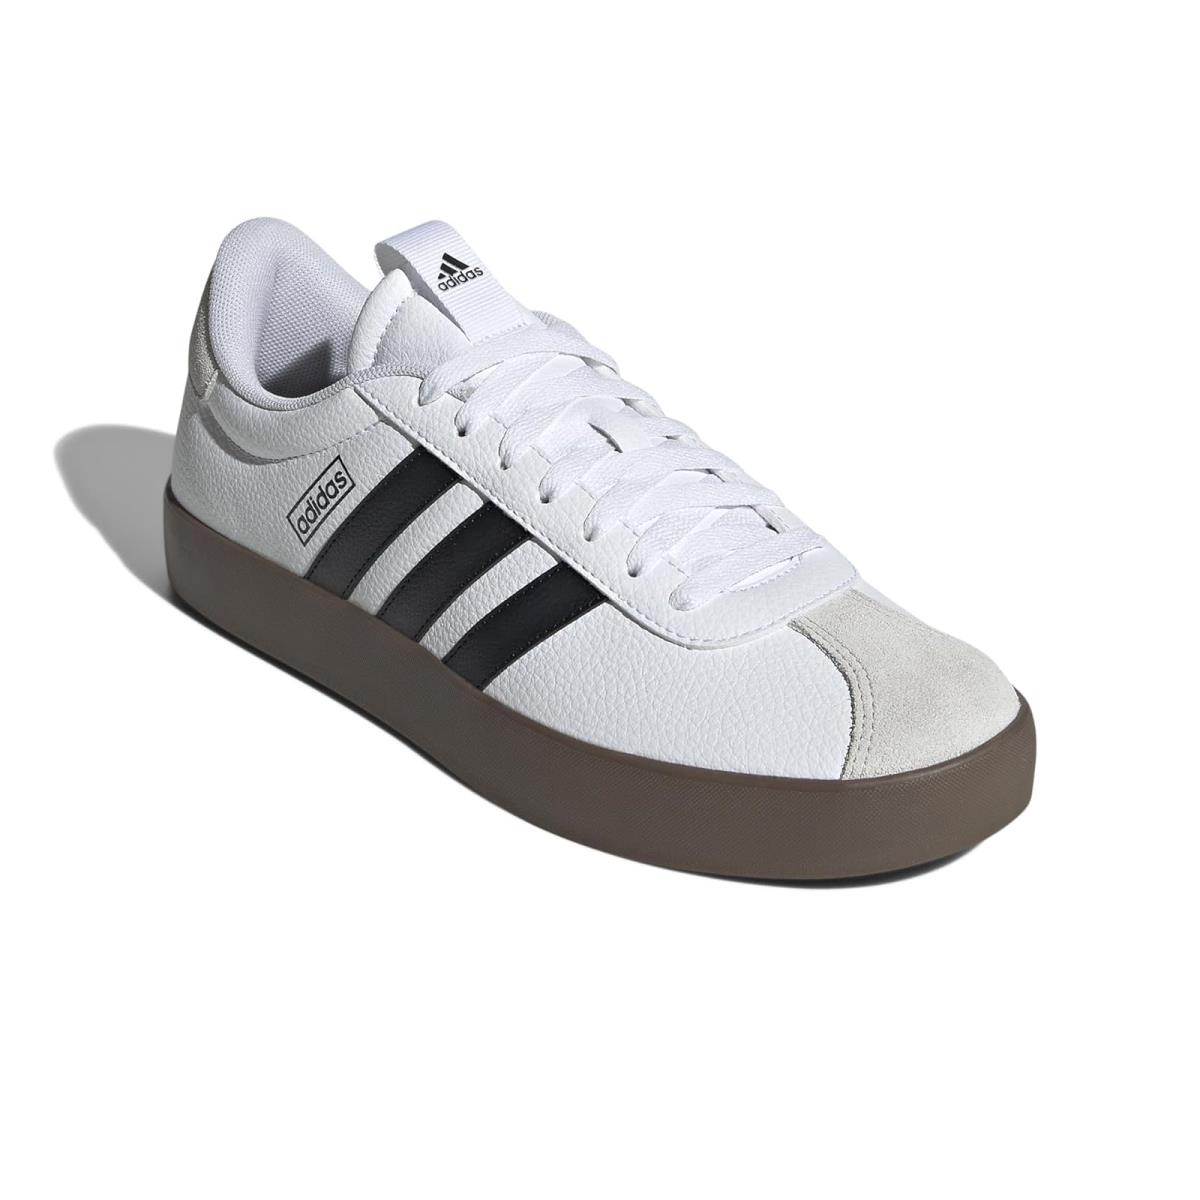 Man`s Sneakers Athletic Shoes Adidas VL Court 3.0 White/Black/Grey